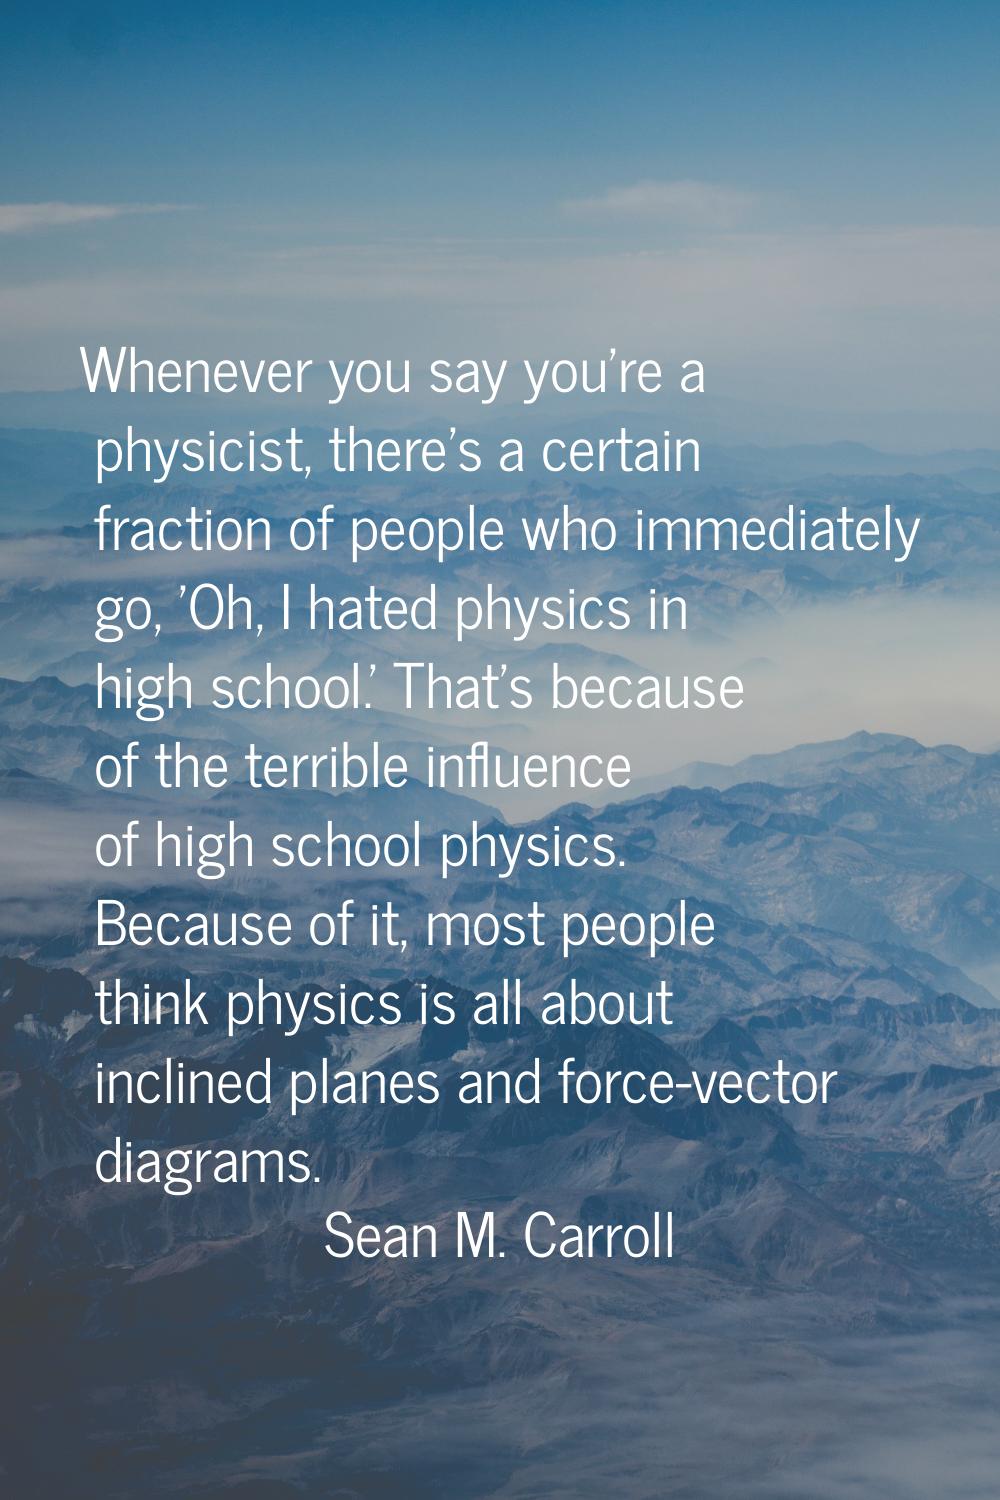 Whenever you say you're a physicist, there's a certain fraction of people who immediately go, 'Oh, 